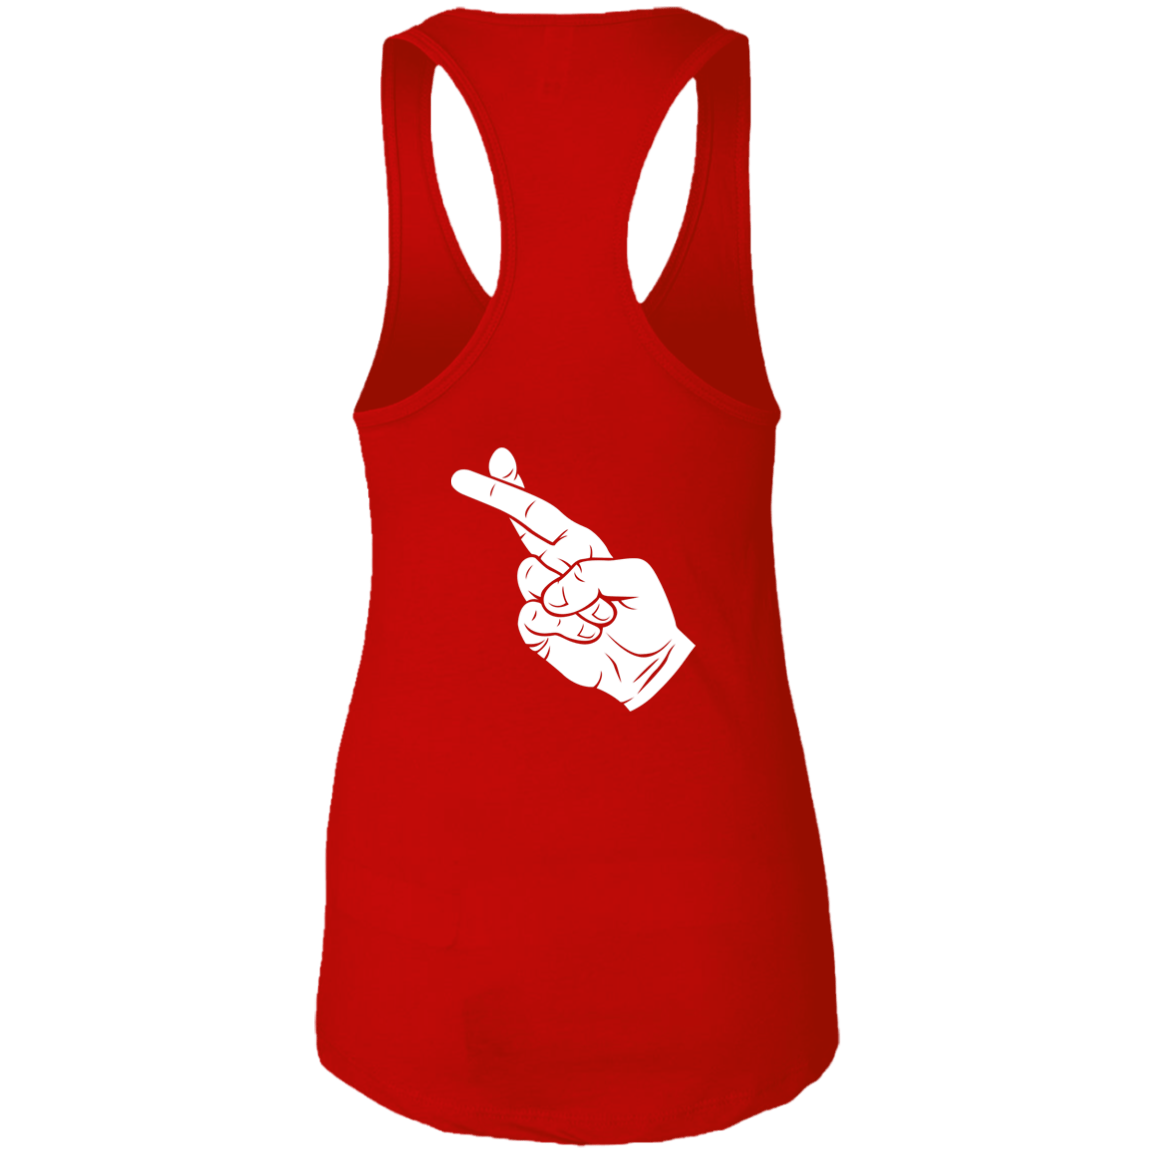 I Swear No More Dogs - Ladies Racer Back Tank.